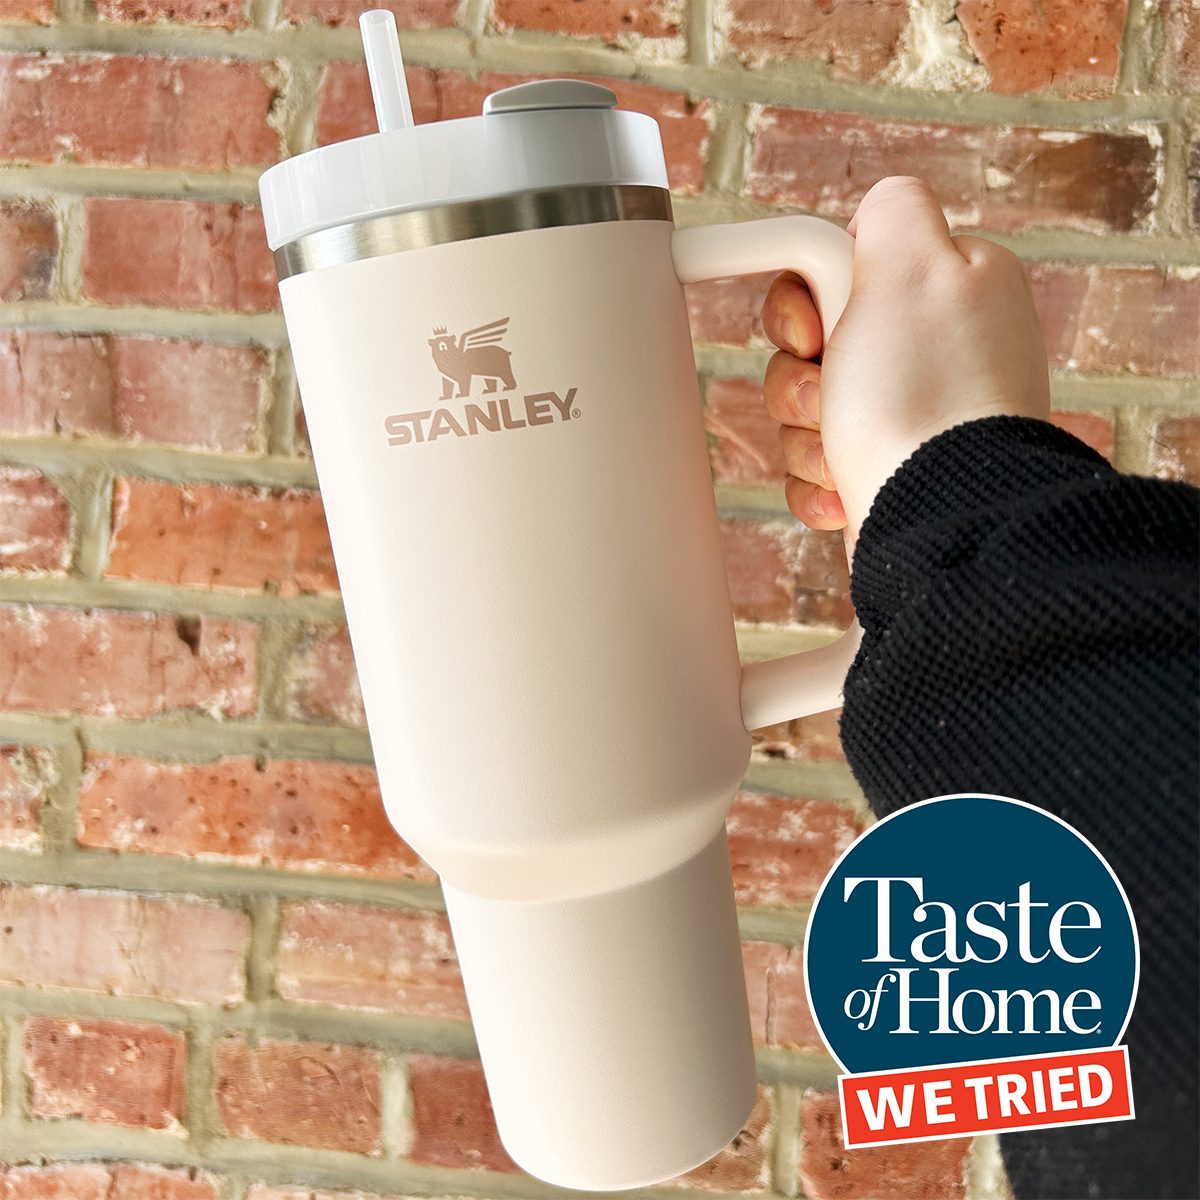 Stylish and Functional: A Look at the Design of Stanley Water Bottles